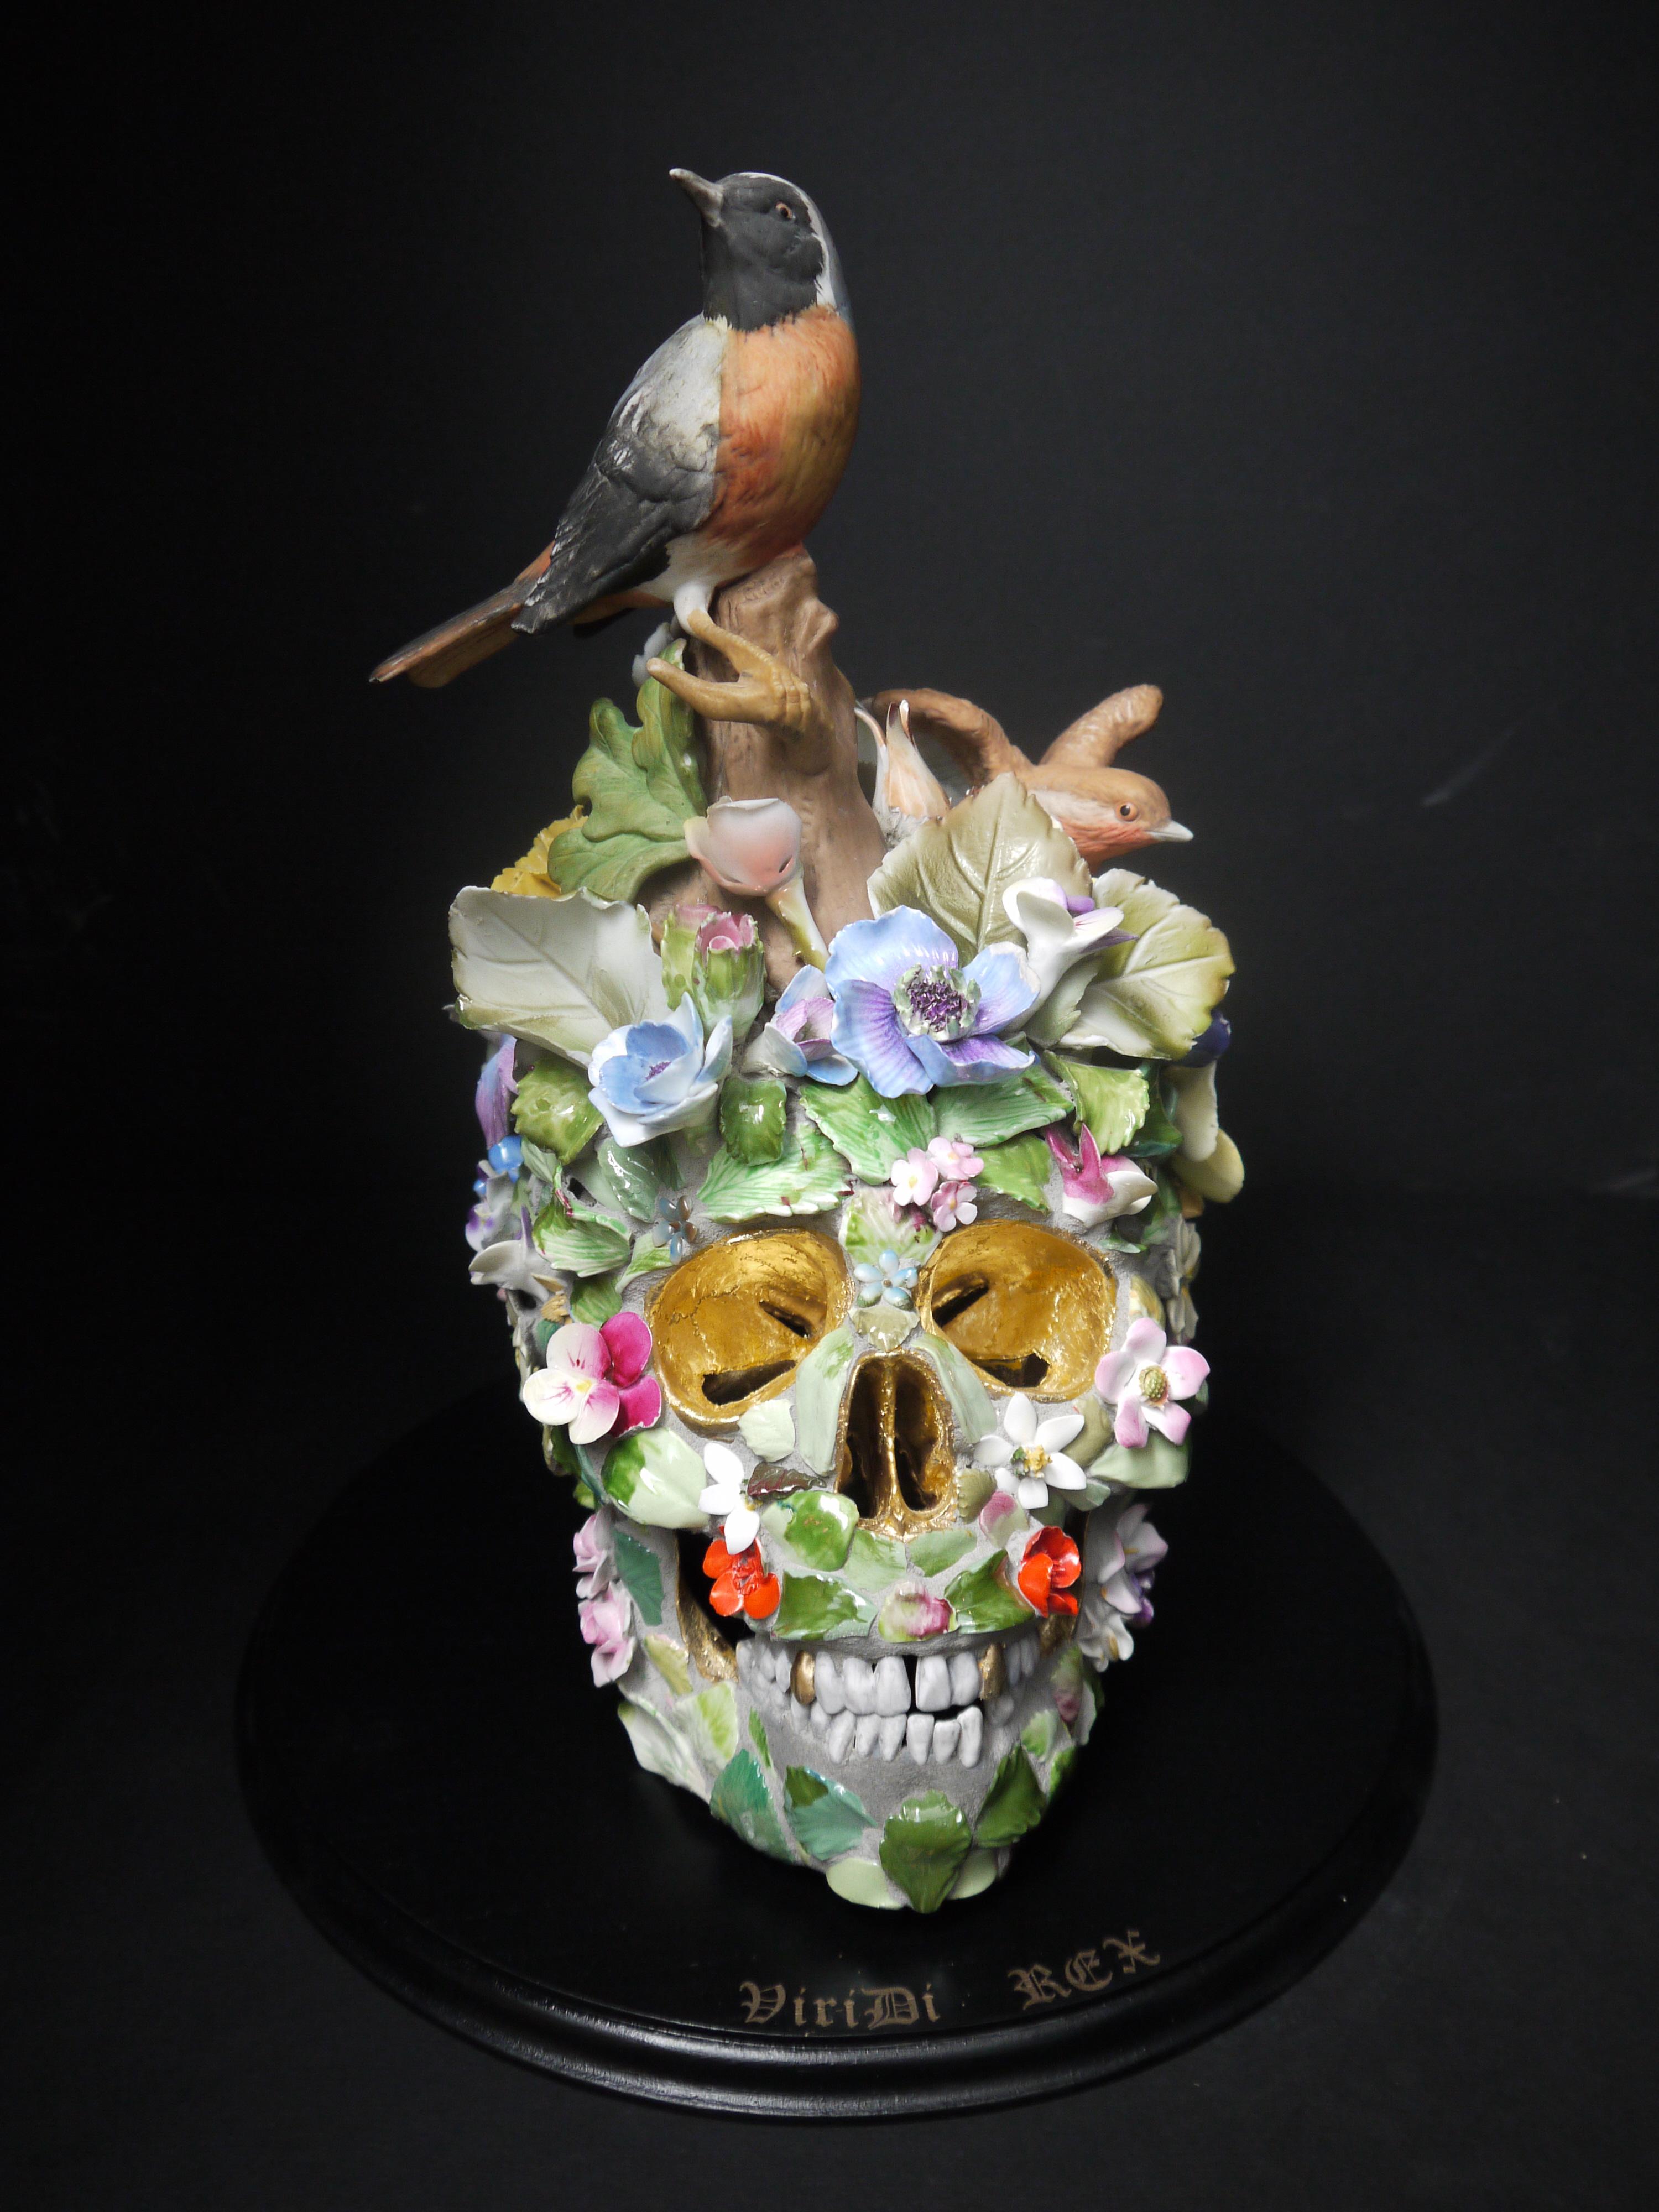 Recycled Ceramic on a life size resin human skull
By Susan Elliott


Taking inspiration from the cupboards of the nation.
 
Since moving to St Leonards from London, in 1999 Susan Elliott has combed every second hand shop, car boot sale and charity